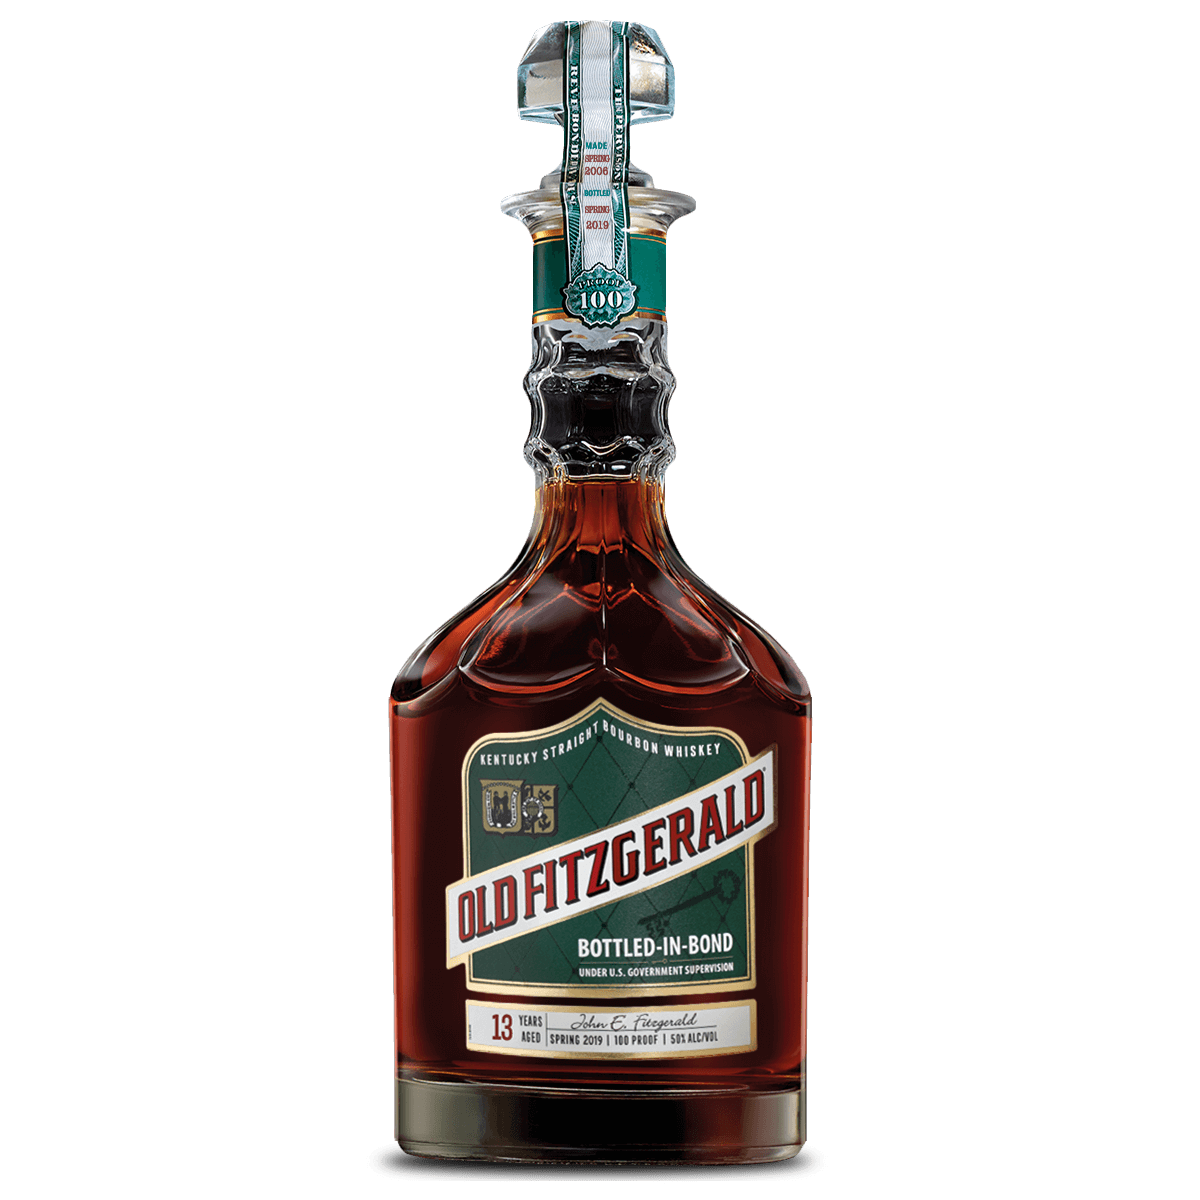 Old Fitzgerald Bottled-in-Bond 13 Year Old Bourbon Whiskey - Barbank